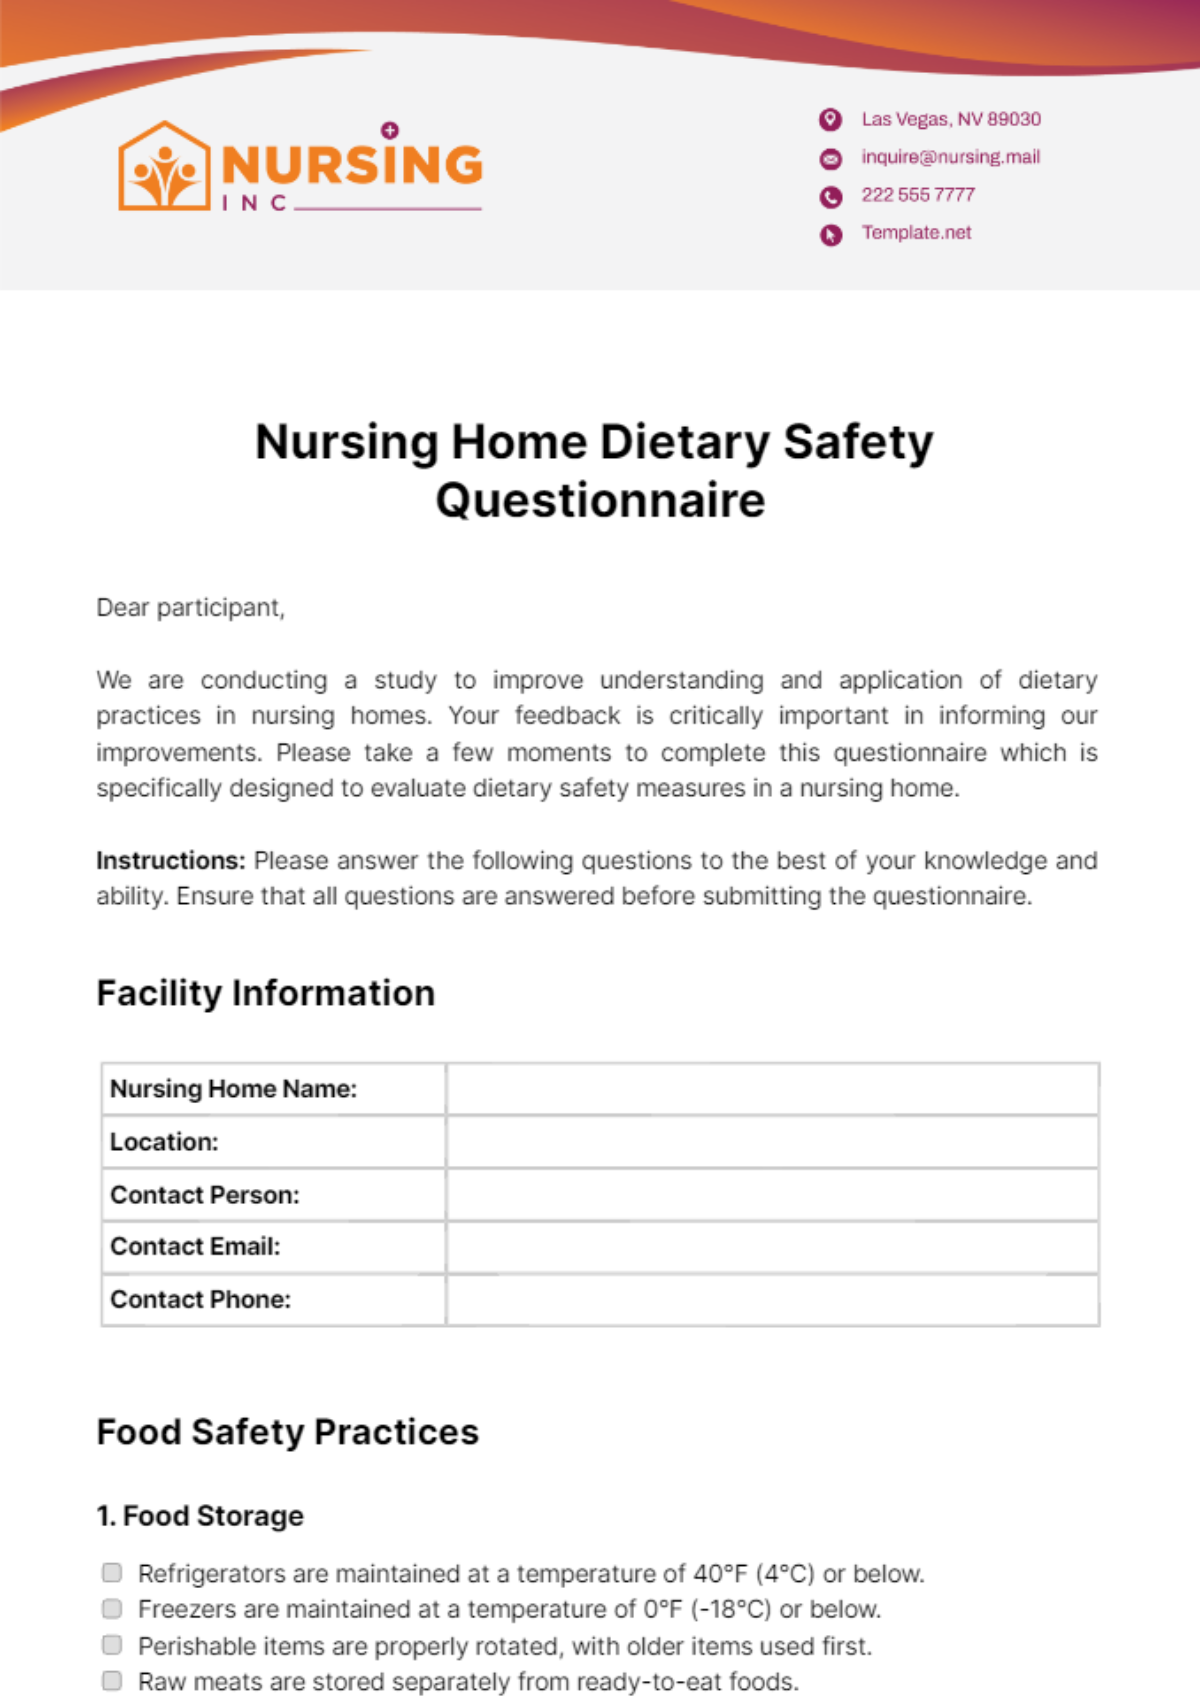 Free Nursing Home Dietary Safety Questionnaire Template